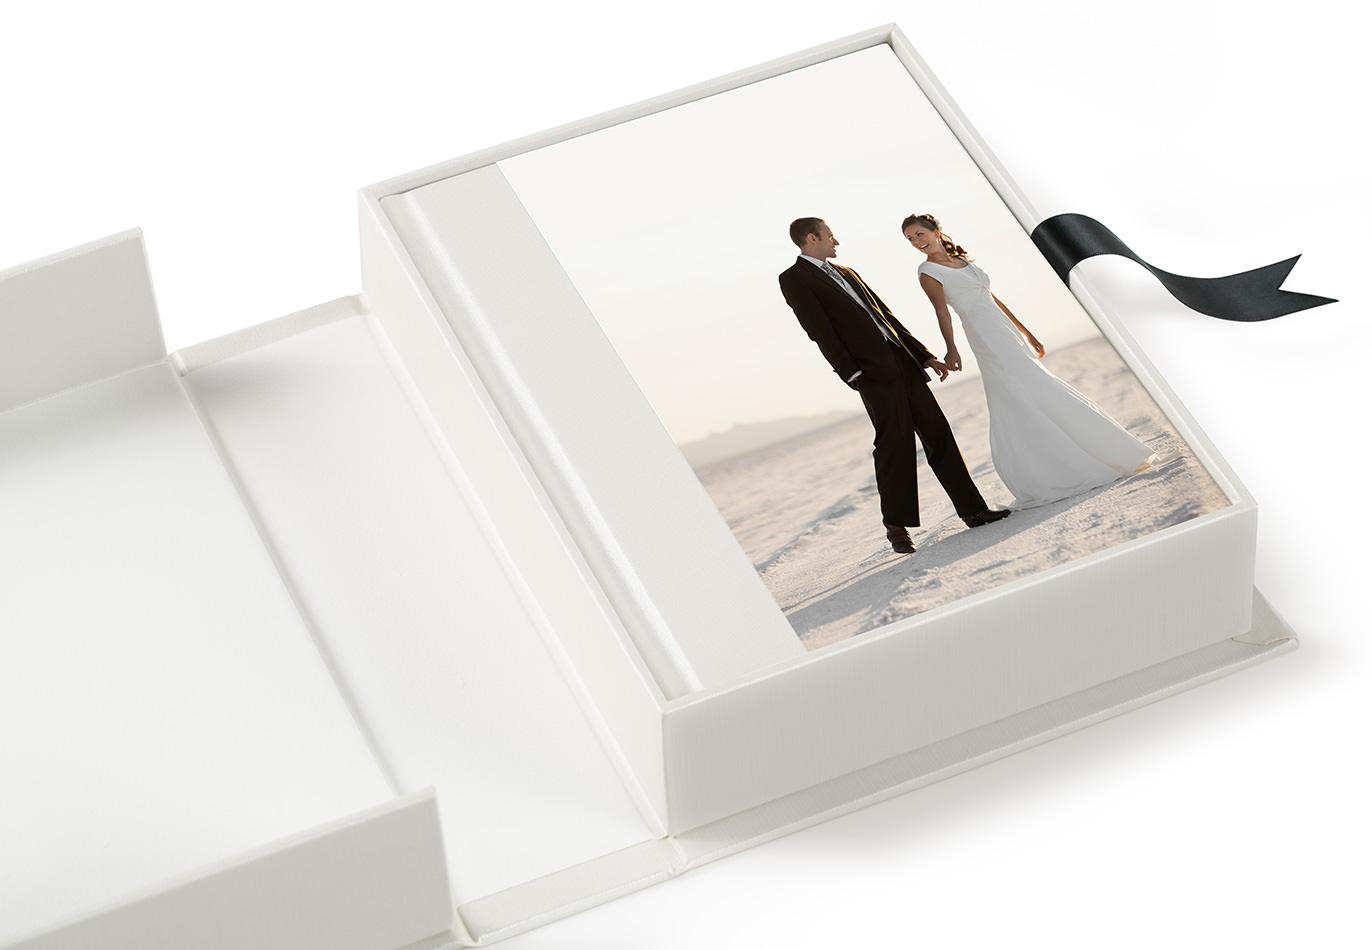 An open MILK presentation box on a white background with a photo album featuring a portrait of a bride and groom on their wedding day on the cover.